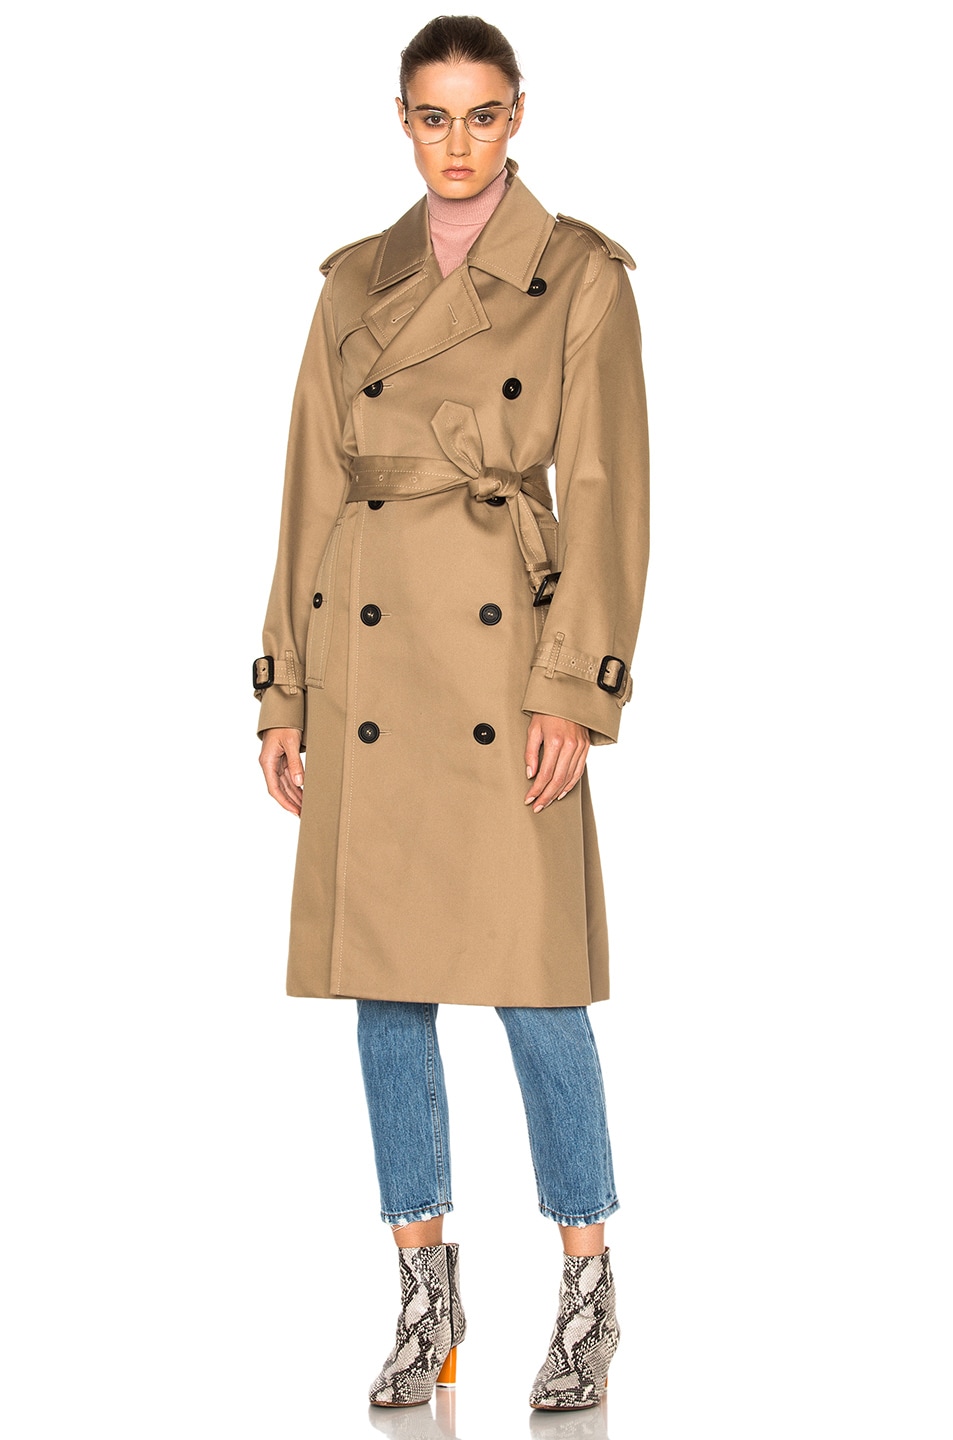 Buy burberry camel trench coat >Free shipping for worldwide!OFF38% The ...